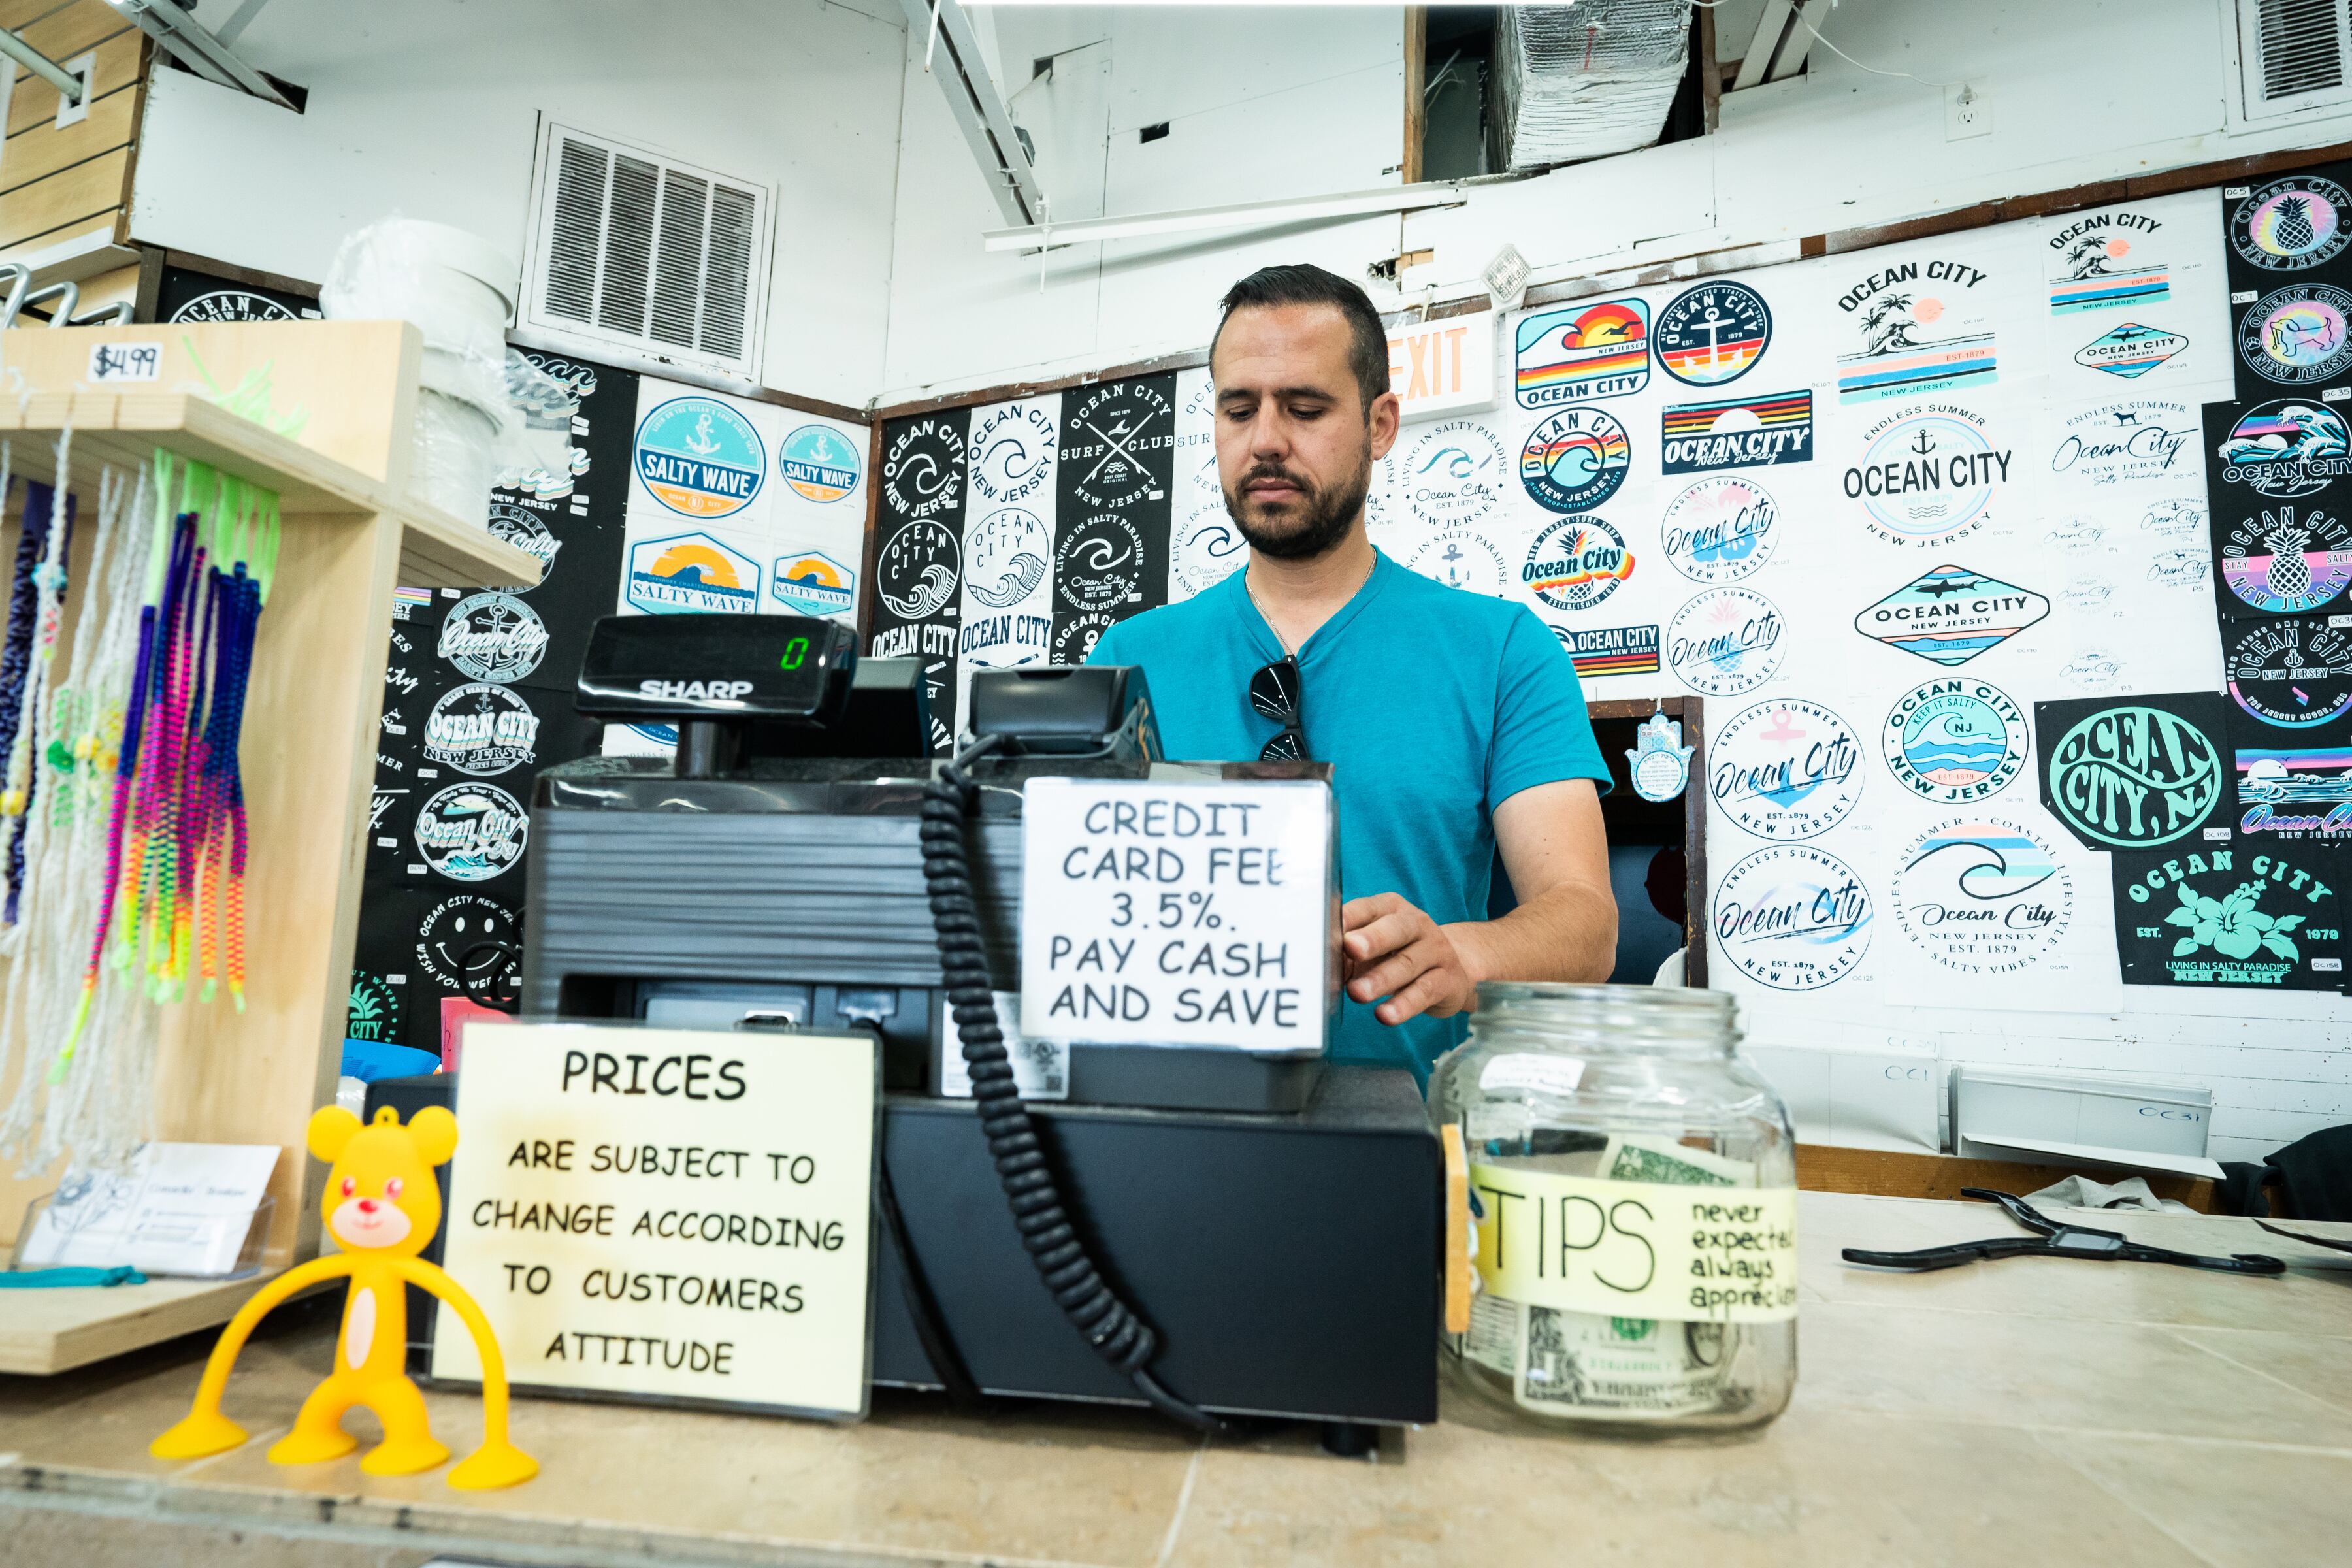 Eli Romy mans the register at one of his boardwalk shops, Shelly's by the Sea, in Ocean City. A sign tells customers they will pay more if they use a credit card. (Jessica Griffin / The Philadelphia Inquirer)